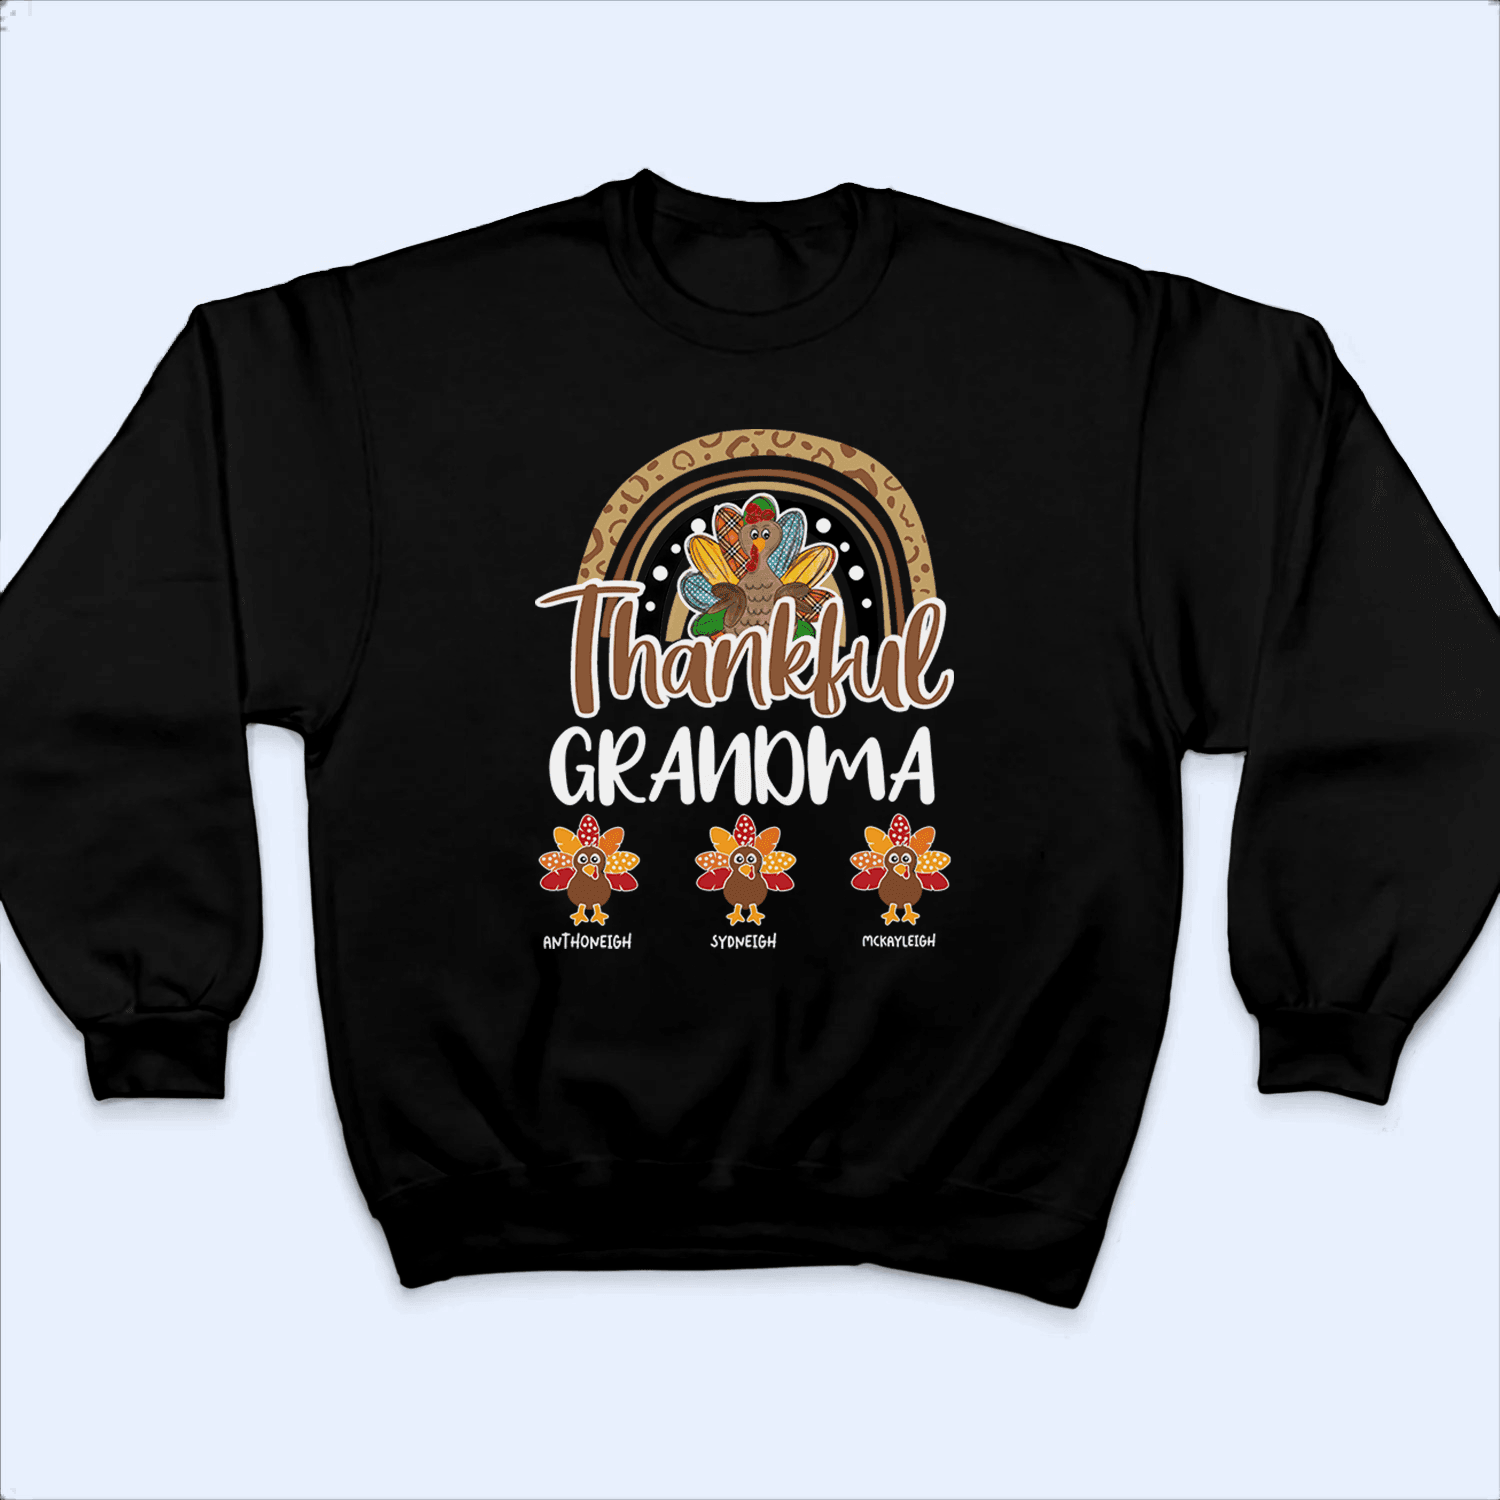 Thankful Grandma Thanksgiving - Personalized Custom T Shirt - Thanksgiving, Autumn, Christmas, Holiday, Birthday, Loving, Funny Gift for Grandmother/Mom/Mother, Wife, Grandparent - Suzitee Store